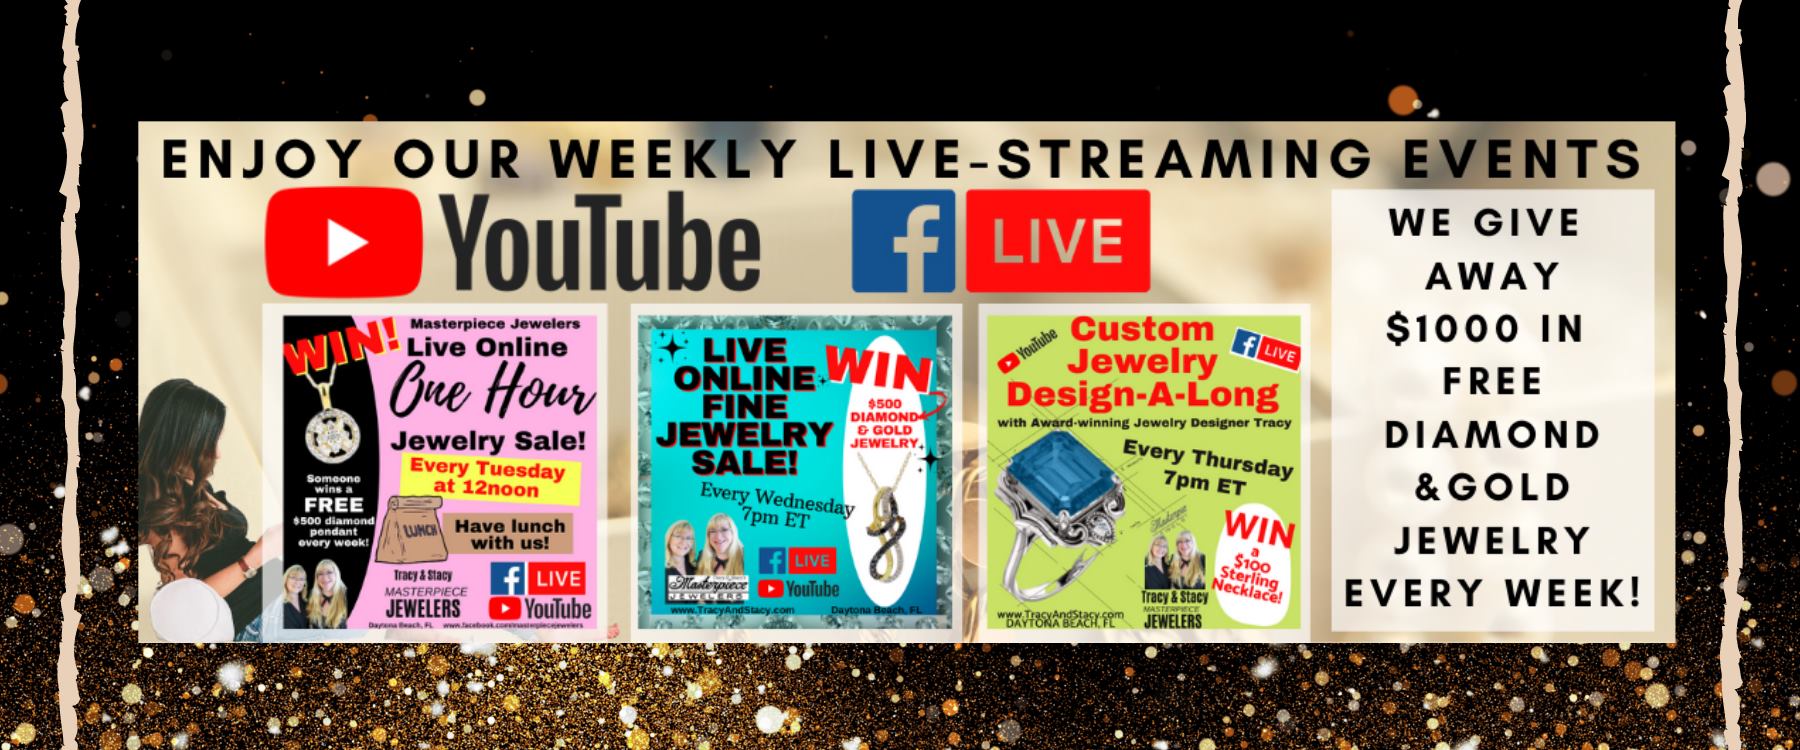 Join us every week to win jewelry at https://www.facebook.com/masterpiecejewelers!